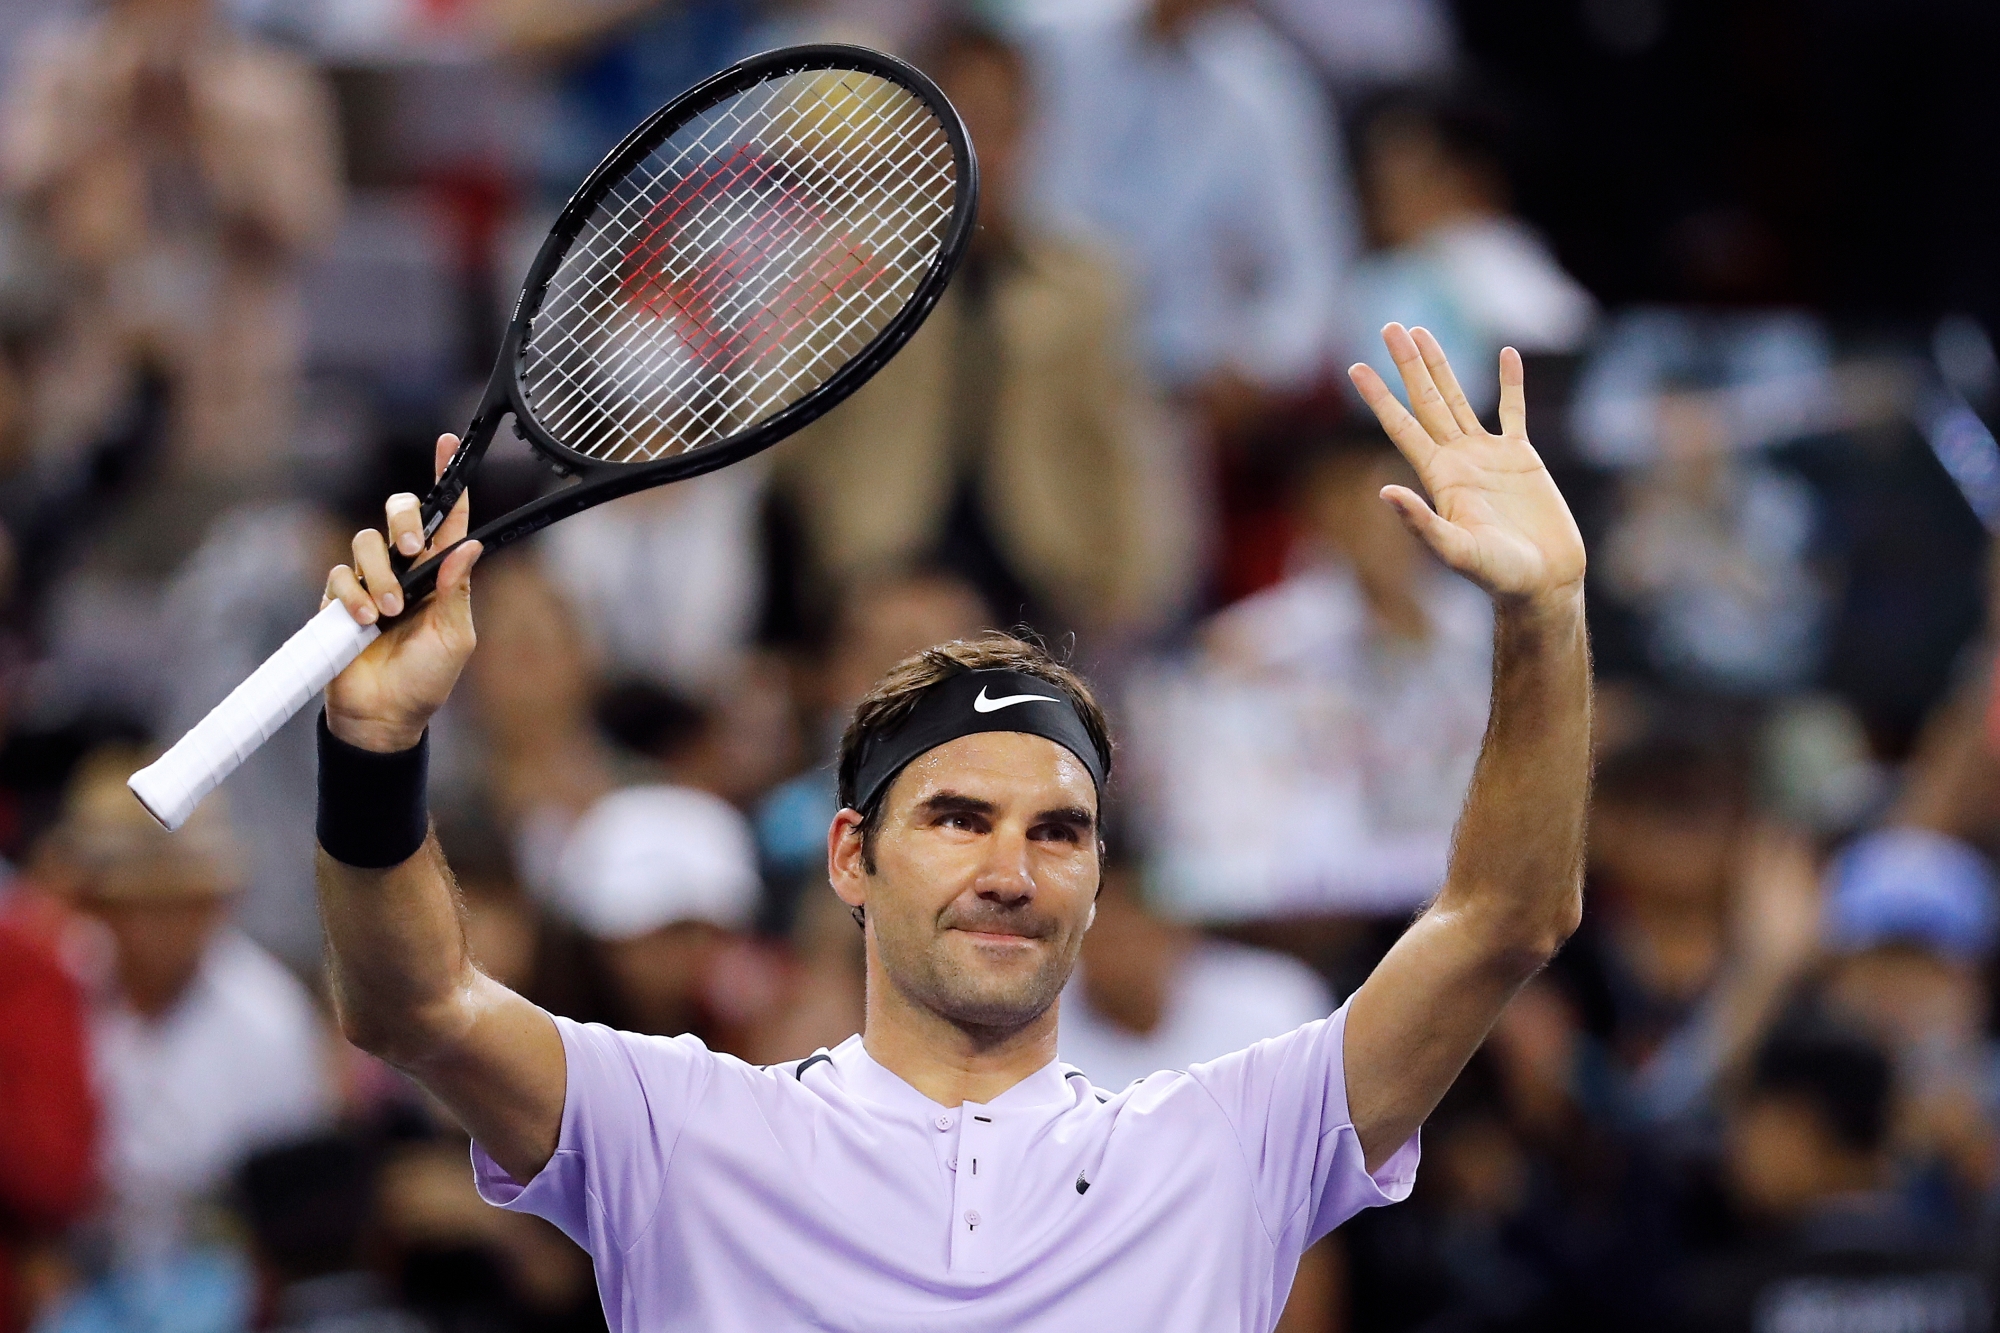 Roger Federer of Switzerland gestures to the spectators after defeating Diego Schwartzman of Argentina in their men's singles match in the Shanghai Masters tennis tournament at Qizhong Forest Sports City Tennis Center in Shanghai, China, Wednesday, Oct. 11, 2017. (AP Photo/Andy Wong) China Tennis Shanghai Masters